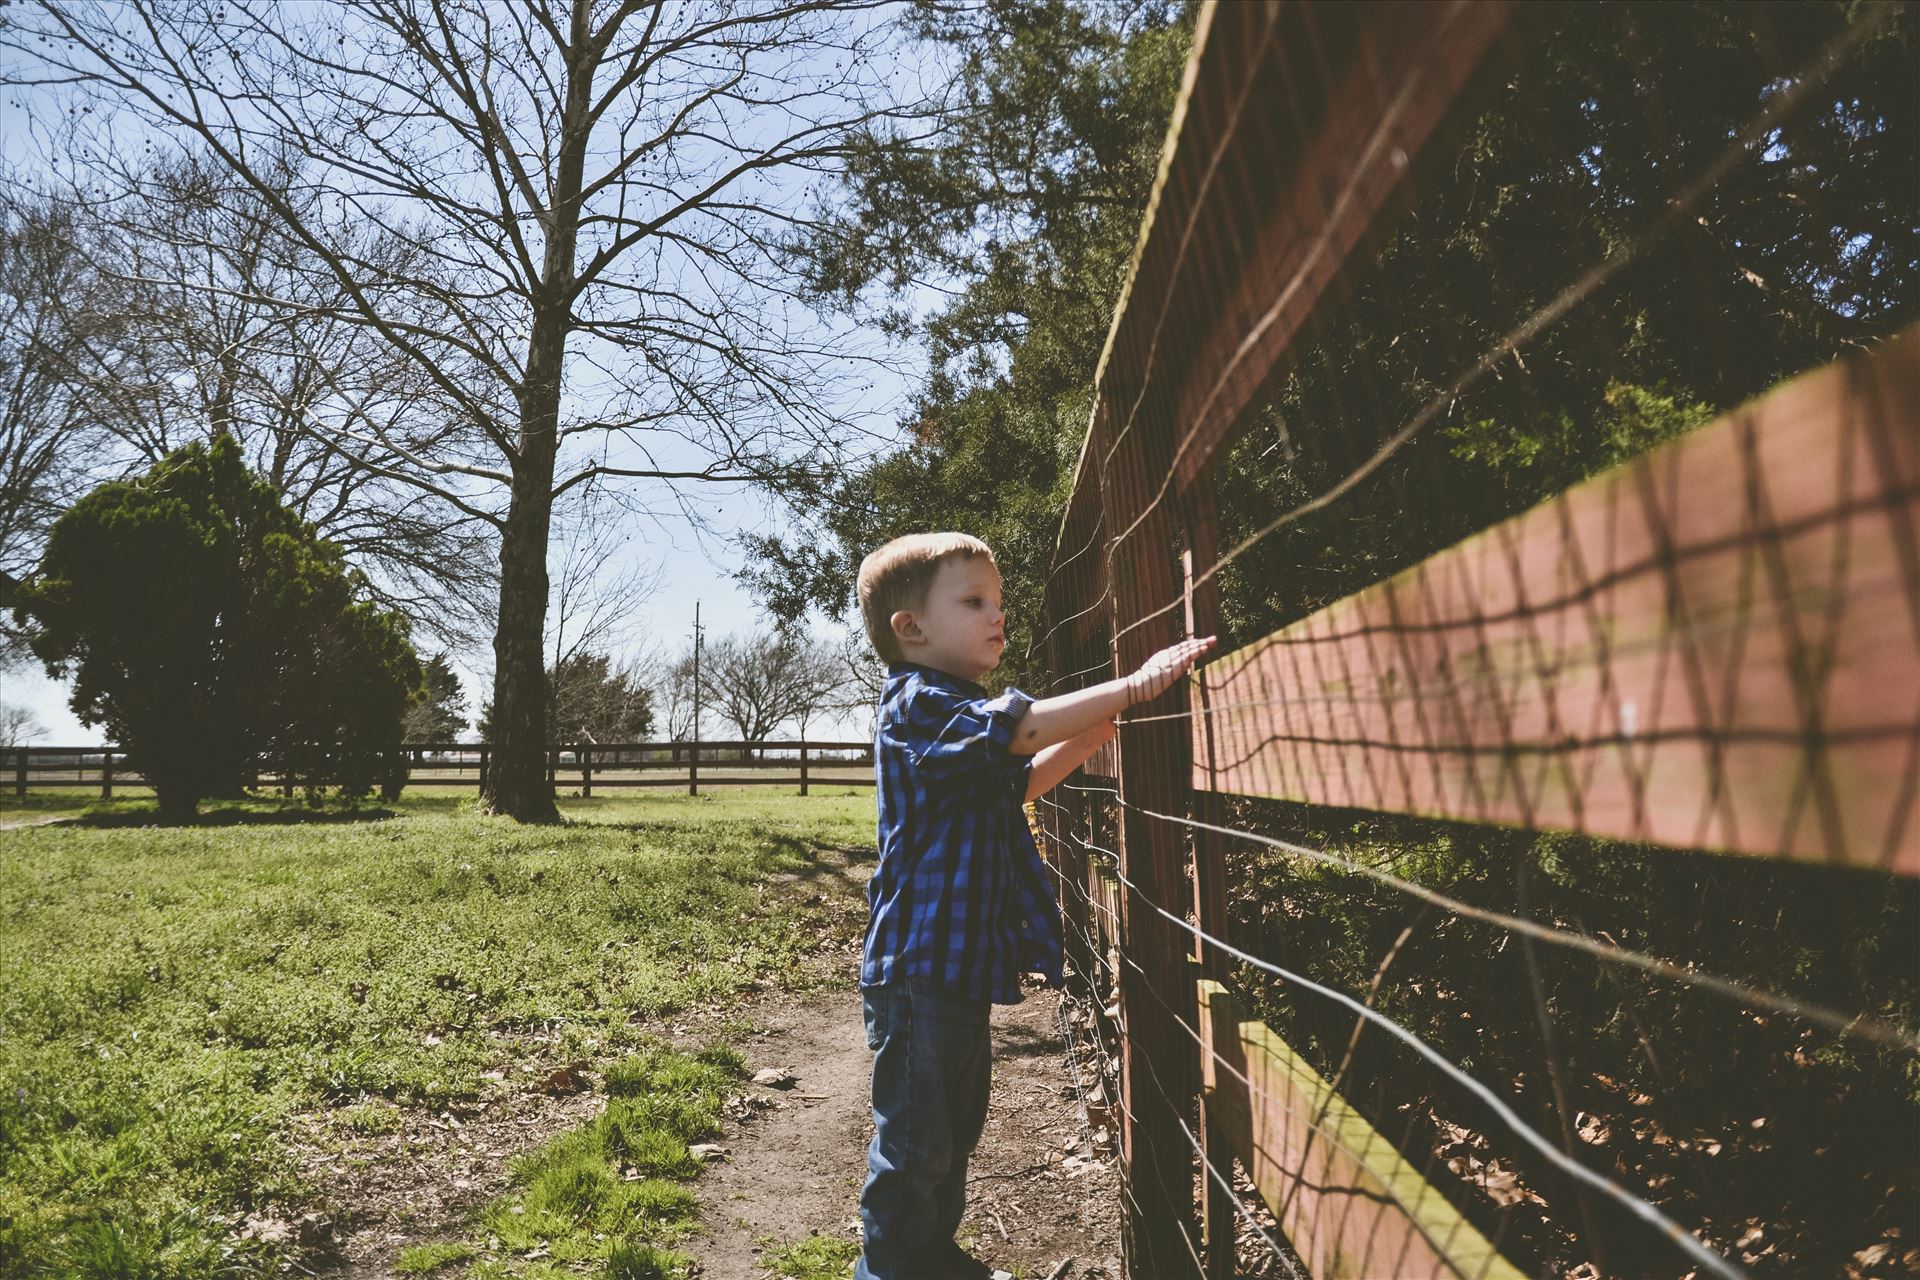 Looking through the fence  by Unbound Photography